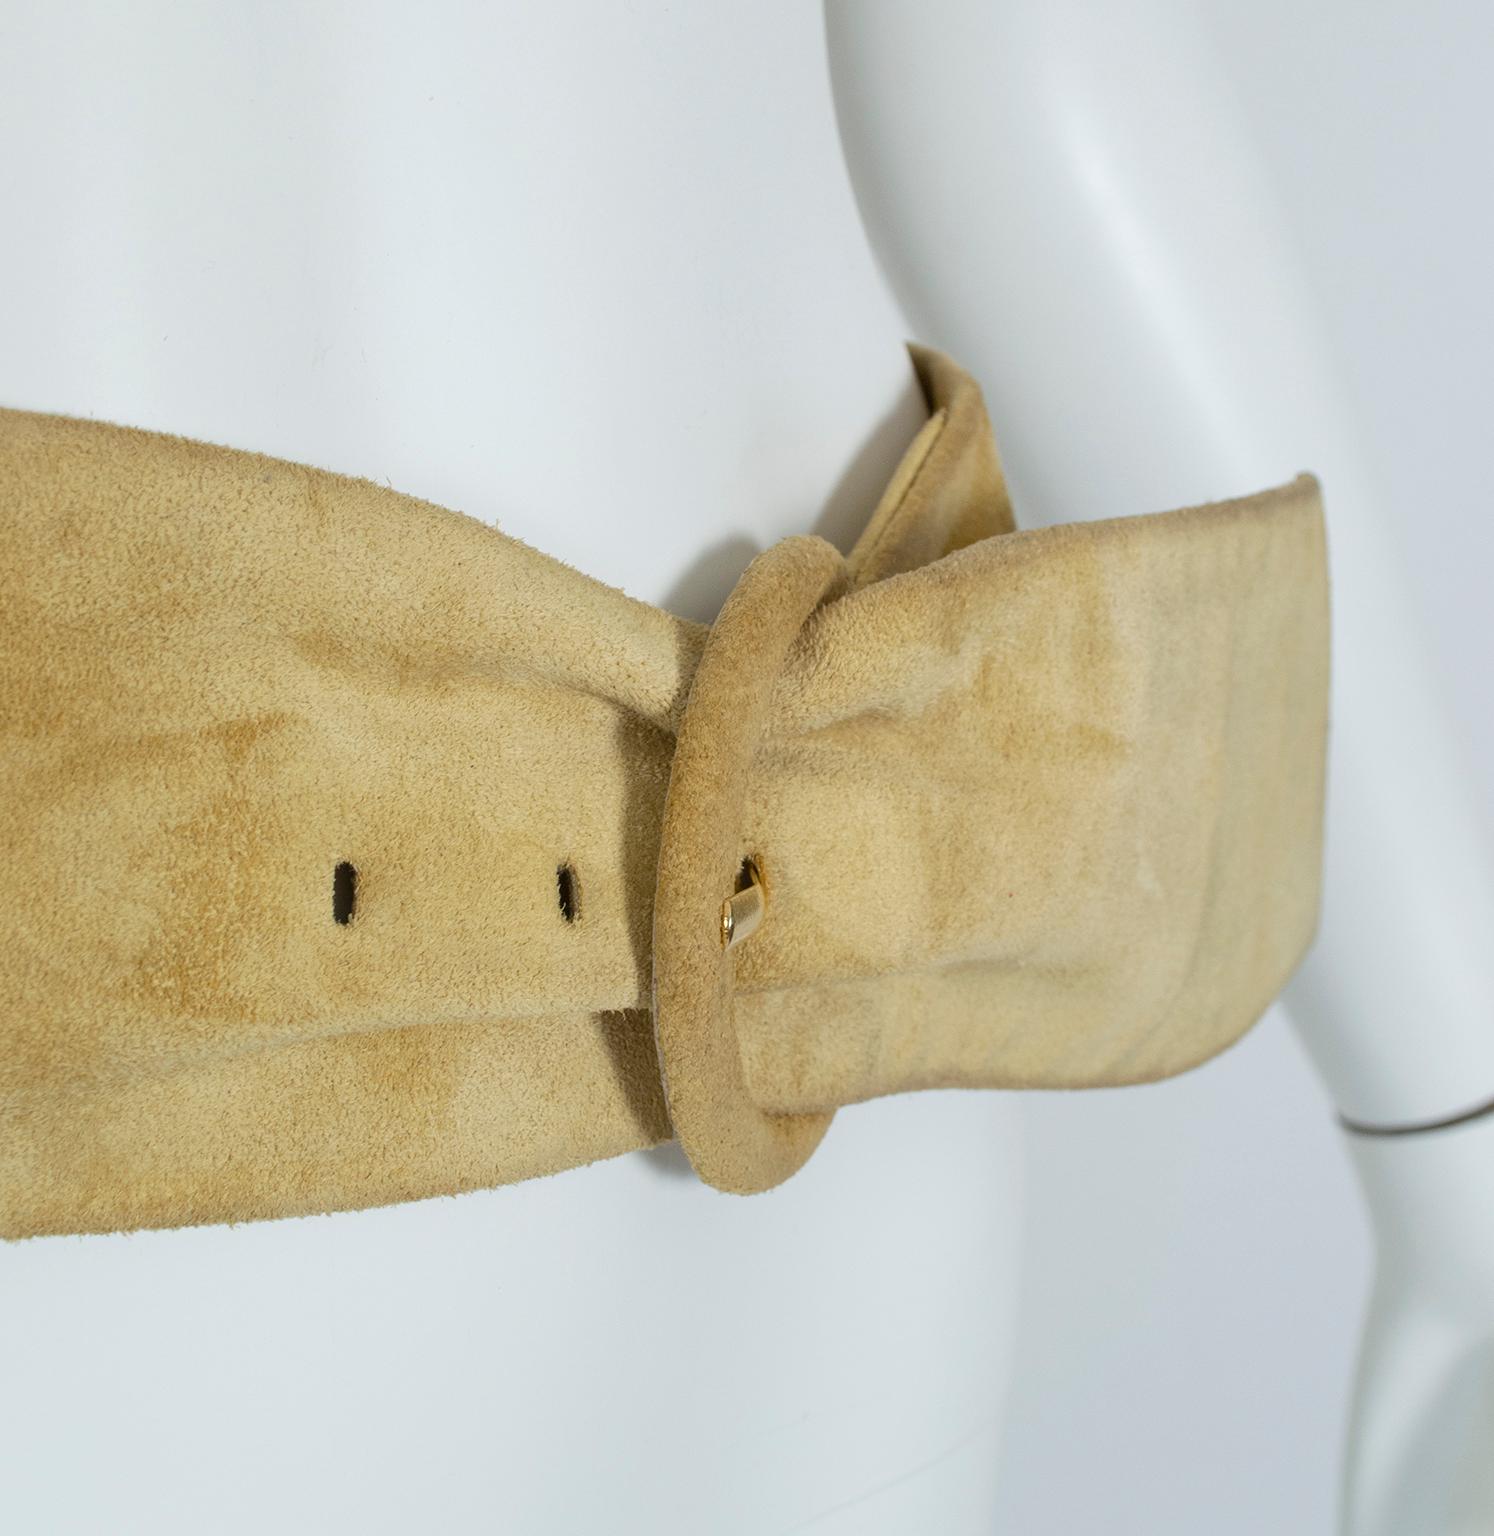 Women's Yves Saint Laurent YSL Wide Camel Suede Belt with Covered Buckle – XS-S, 1980s